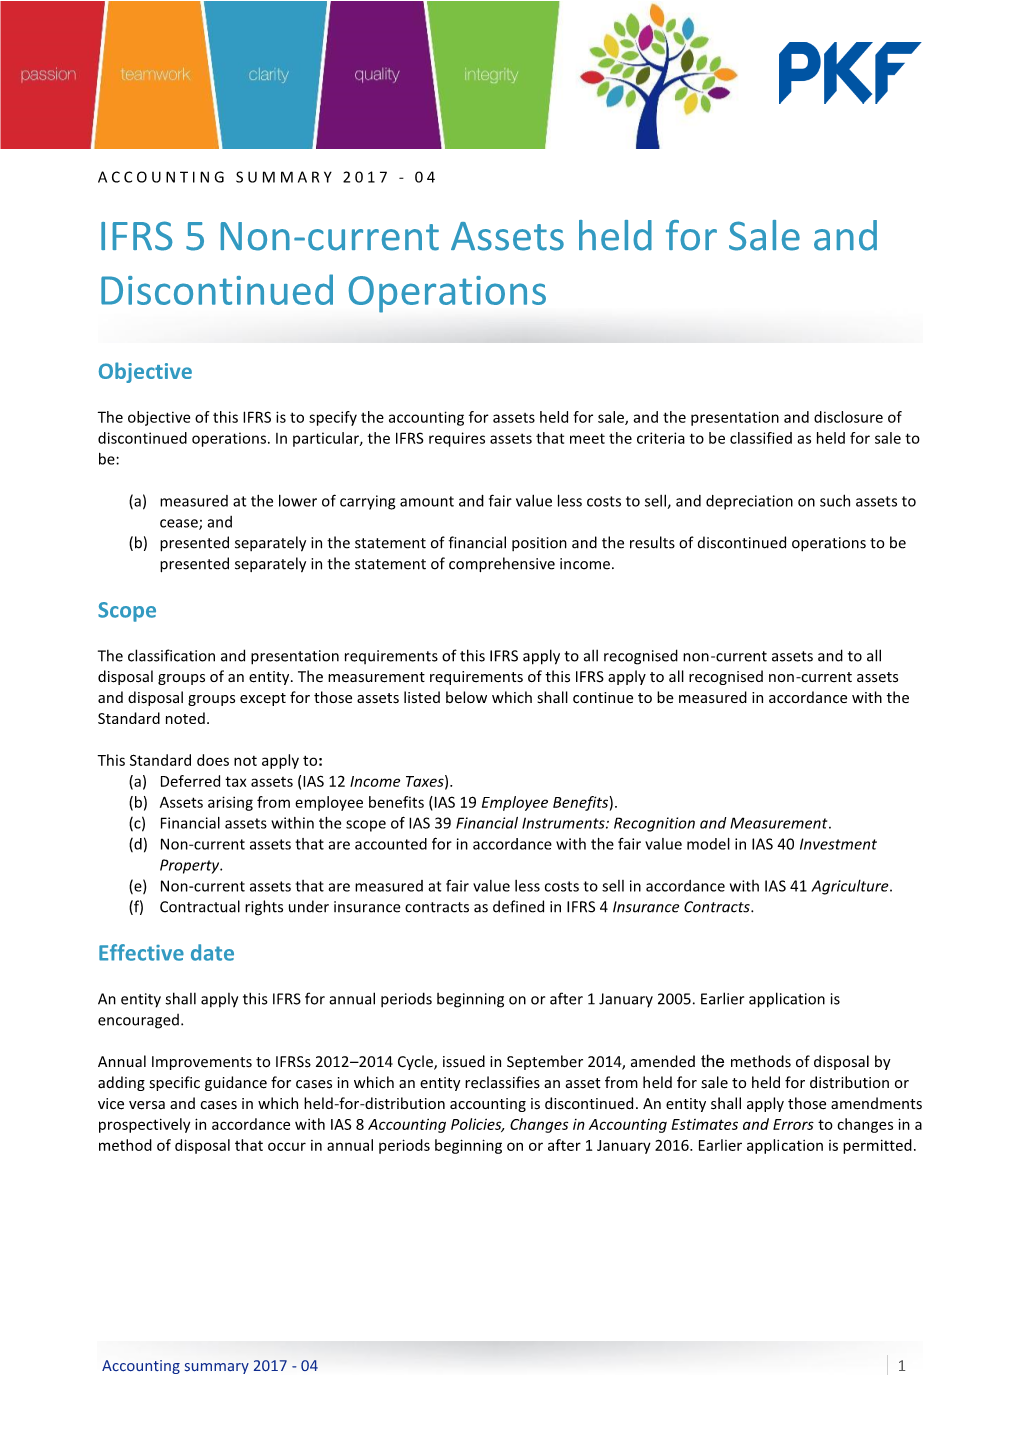 IFRS 5 Non-Current Assets Held for Sale and Discontinued Operations